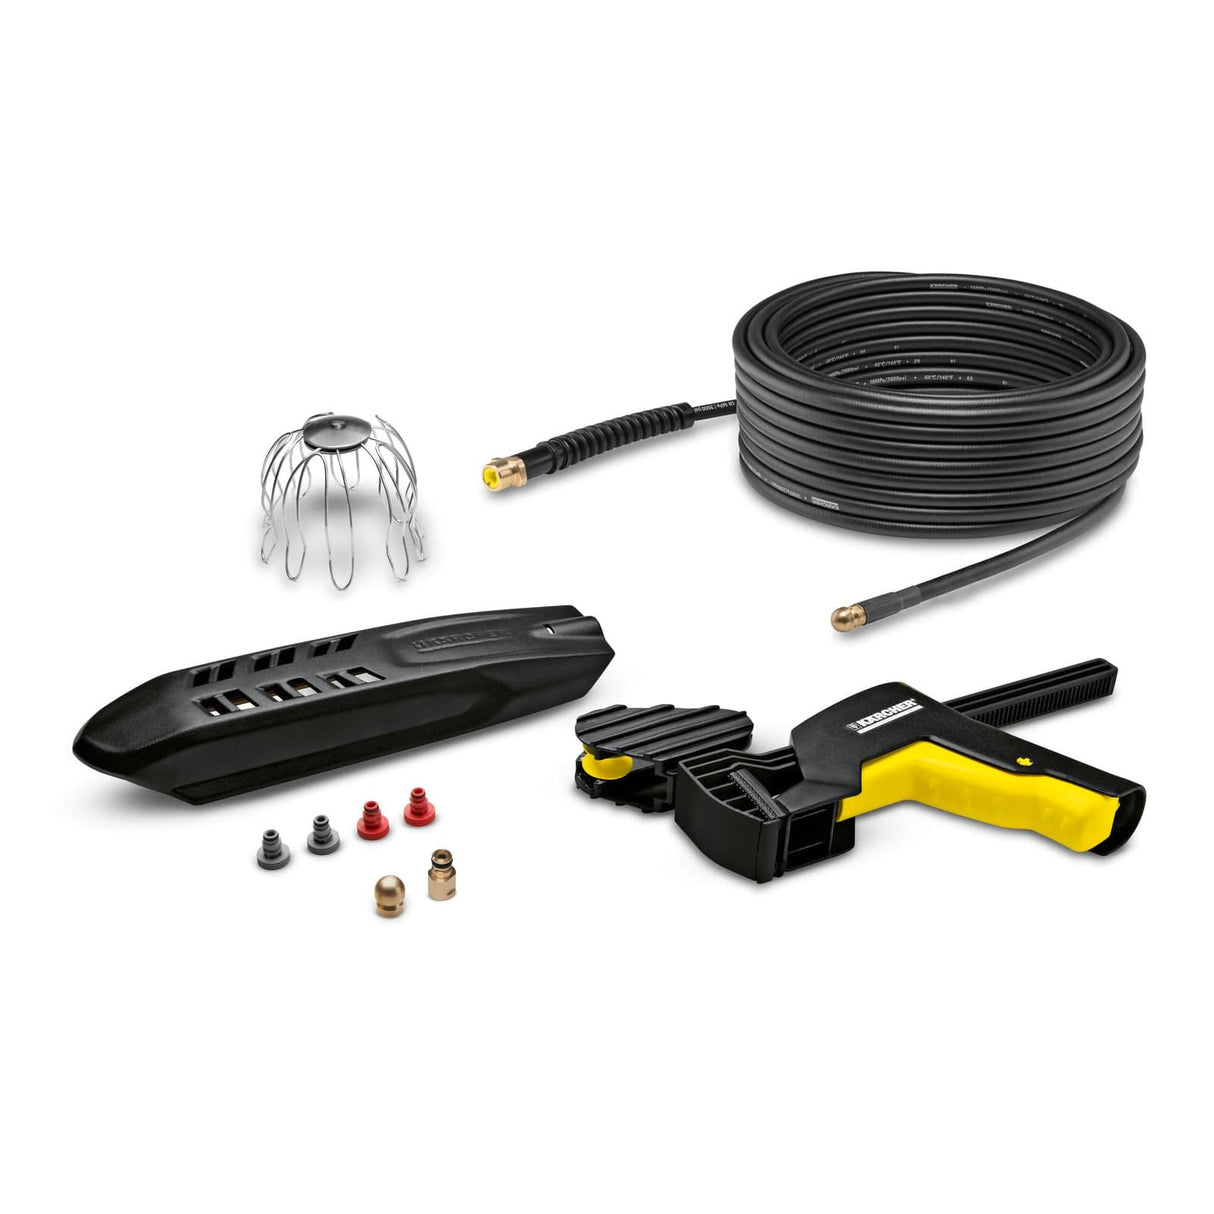 Karcher Cleaning Equipment Accessories Karcher Roof Gutter And Pipe Cleaning Kit - PC20